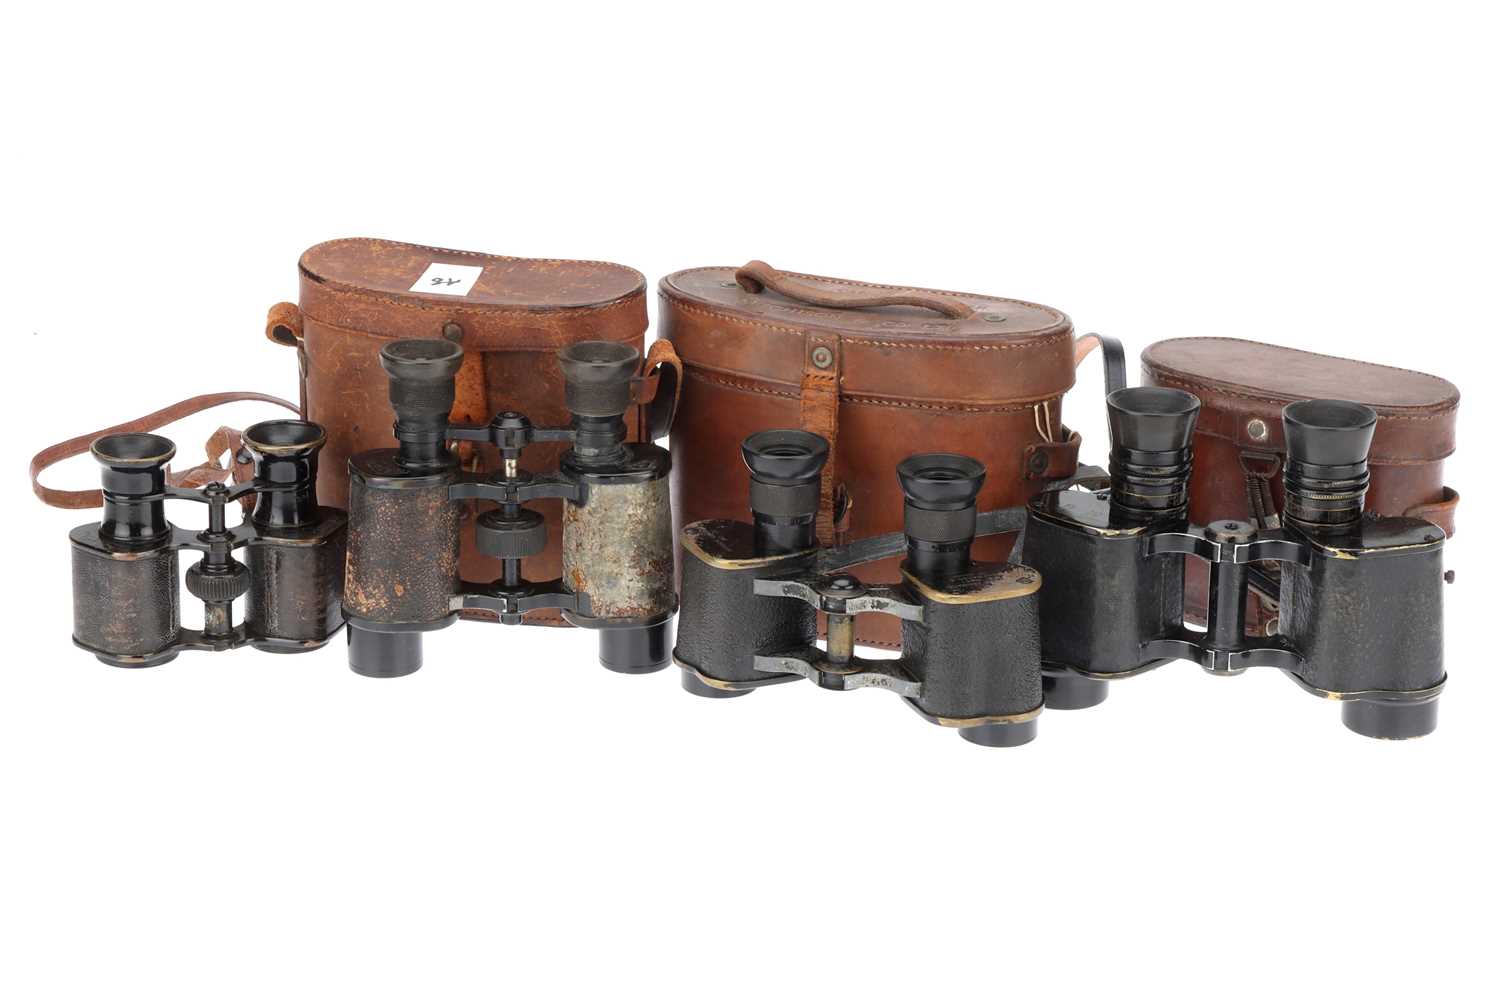 Lot 81 - A Collection of 4 Sets of Binoculars